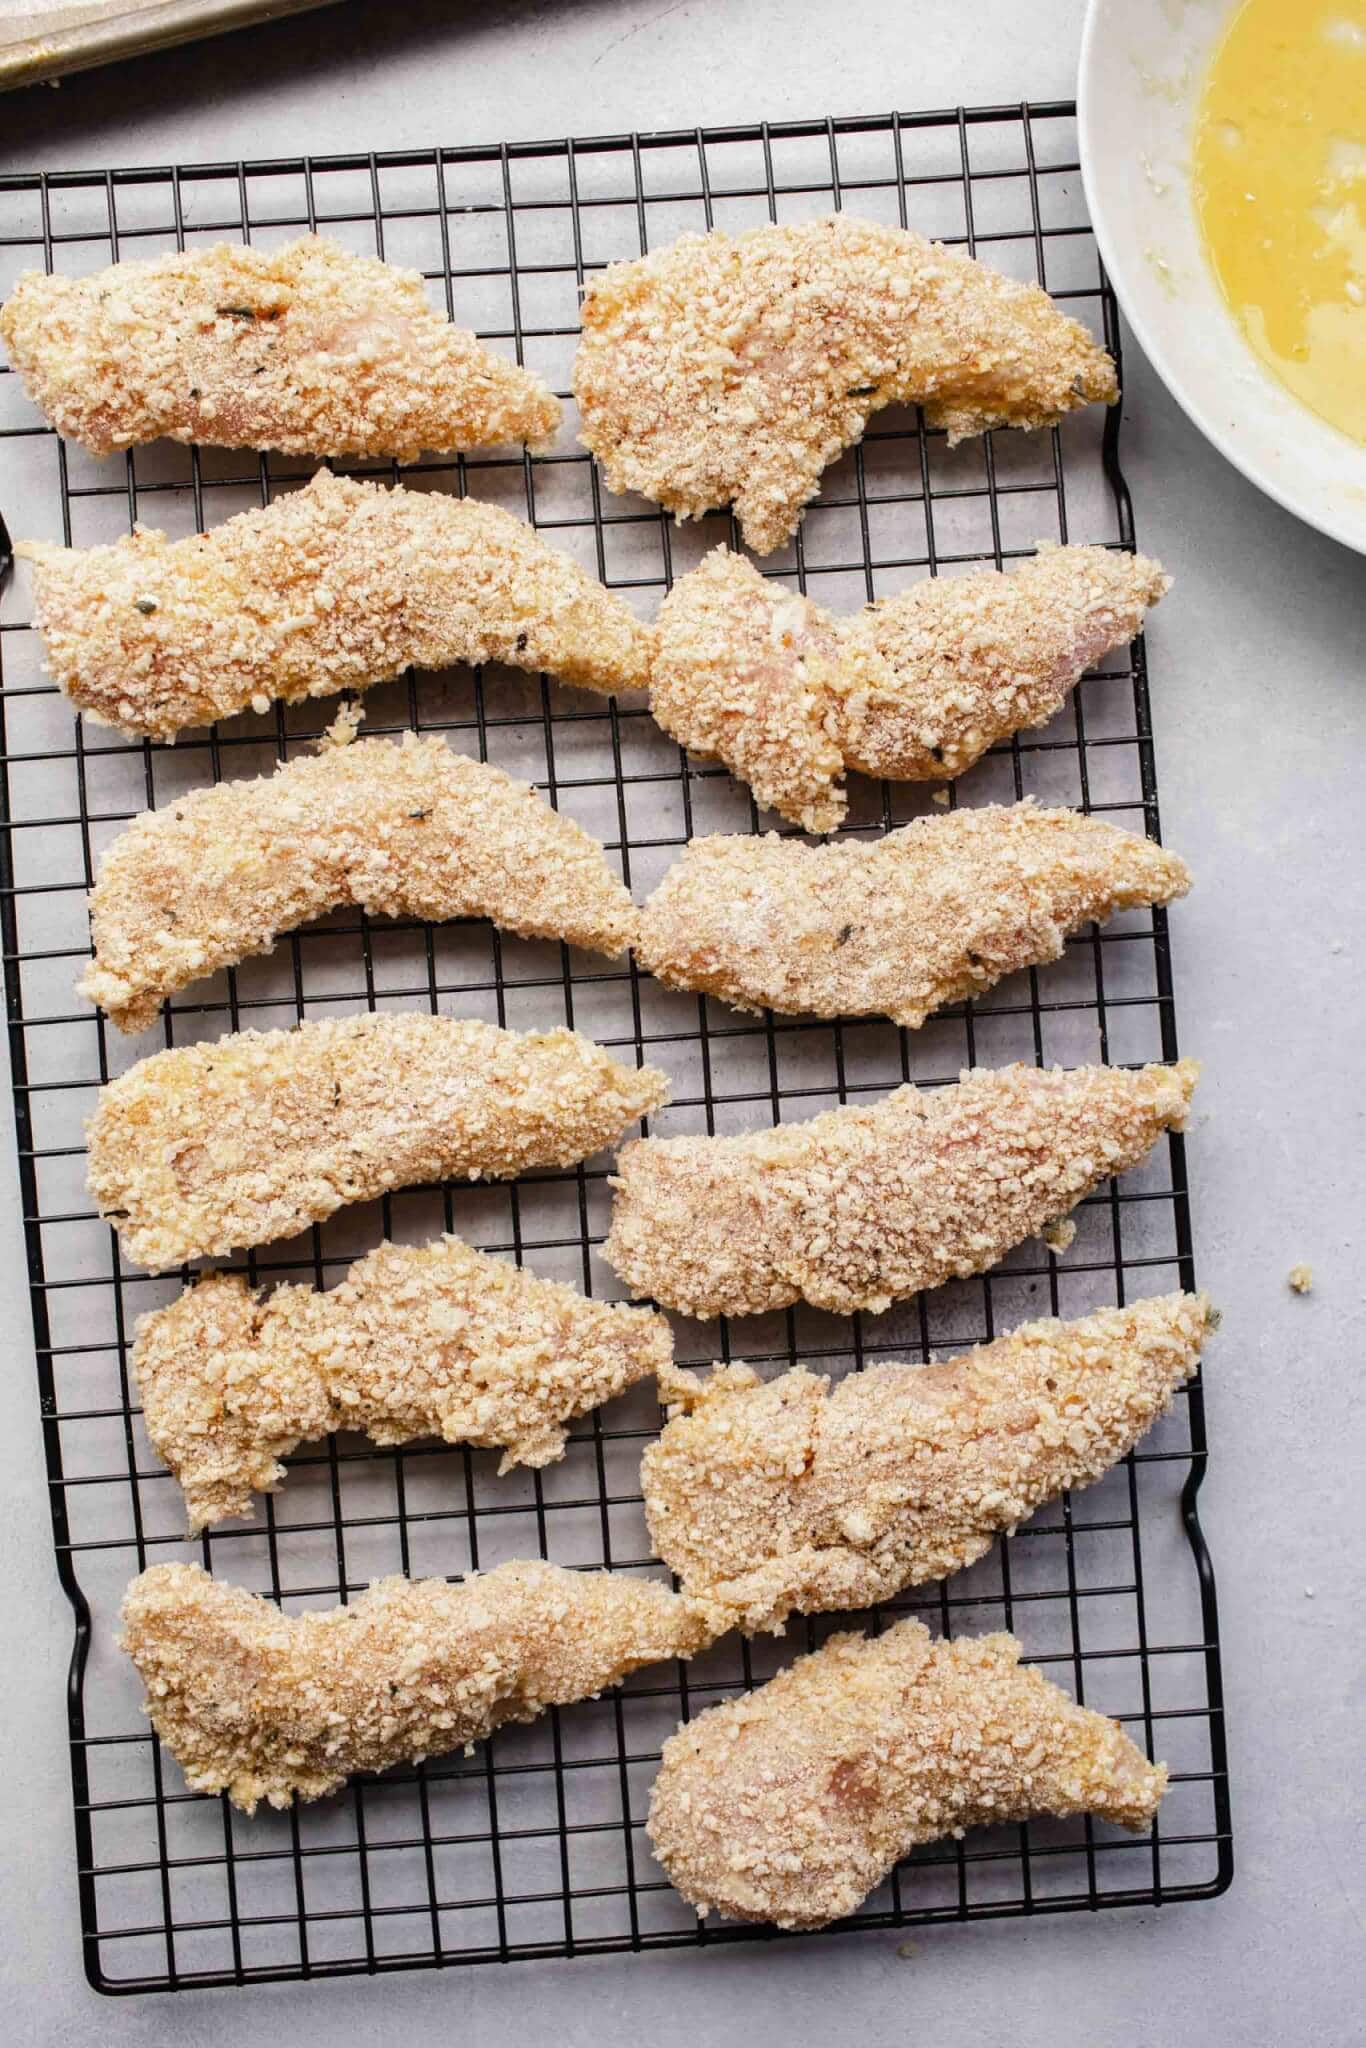 Breaded chicken strips on cookie rack before air frying.